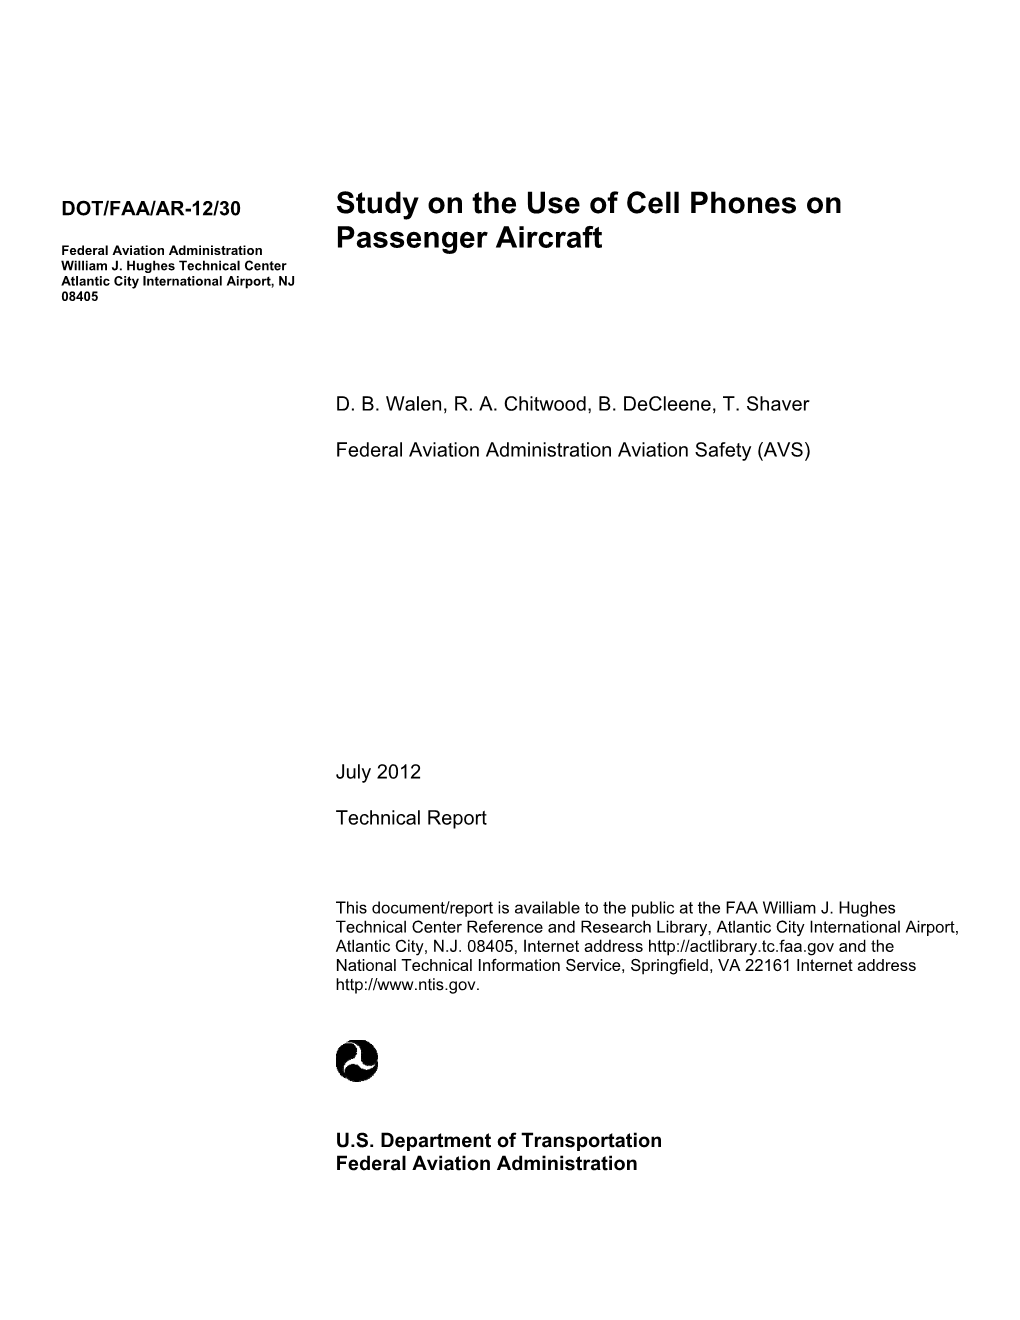 Study on the Use of Cell Phones on Passenger Aircraft July 2012